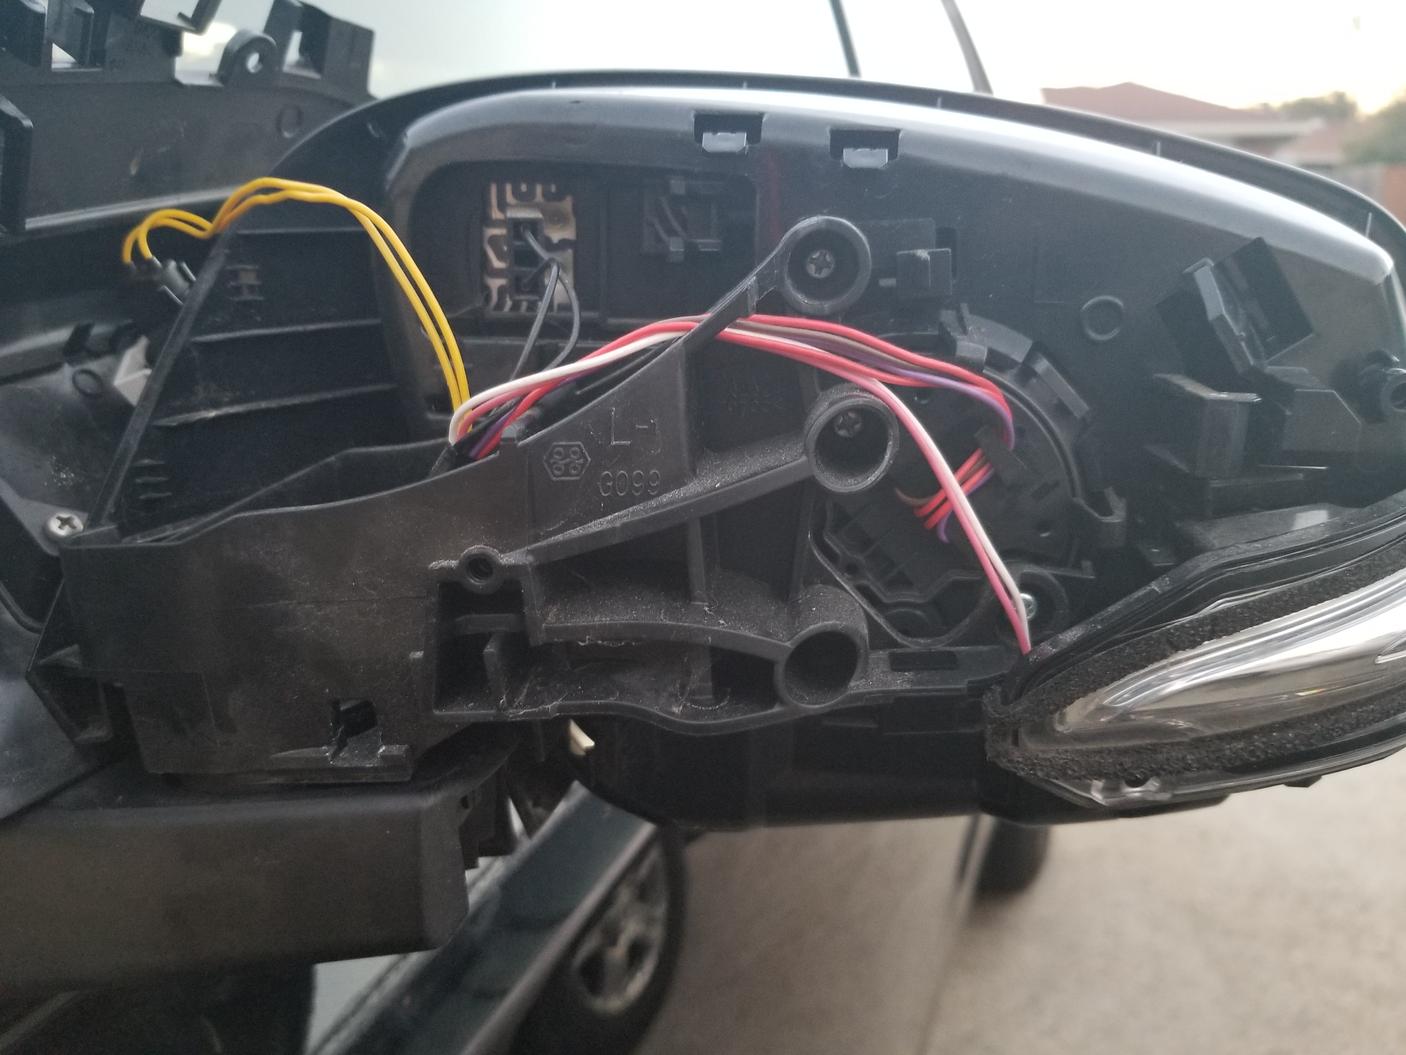 Replace side mirror cap or entire assembly-20181029_181811-jpg